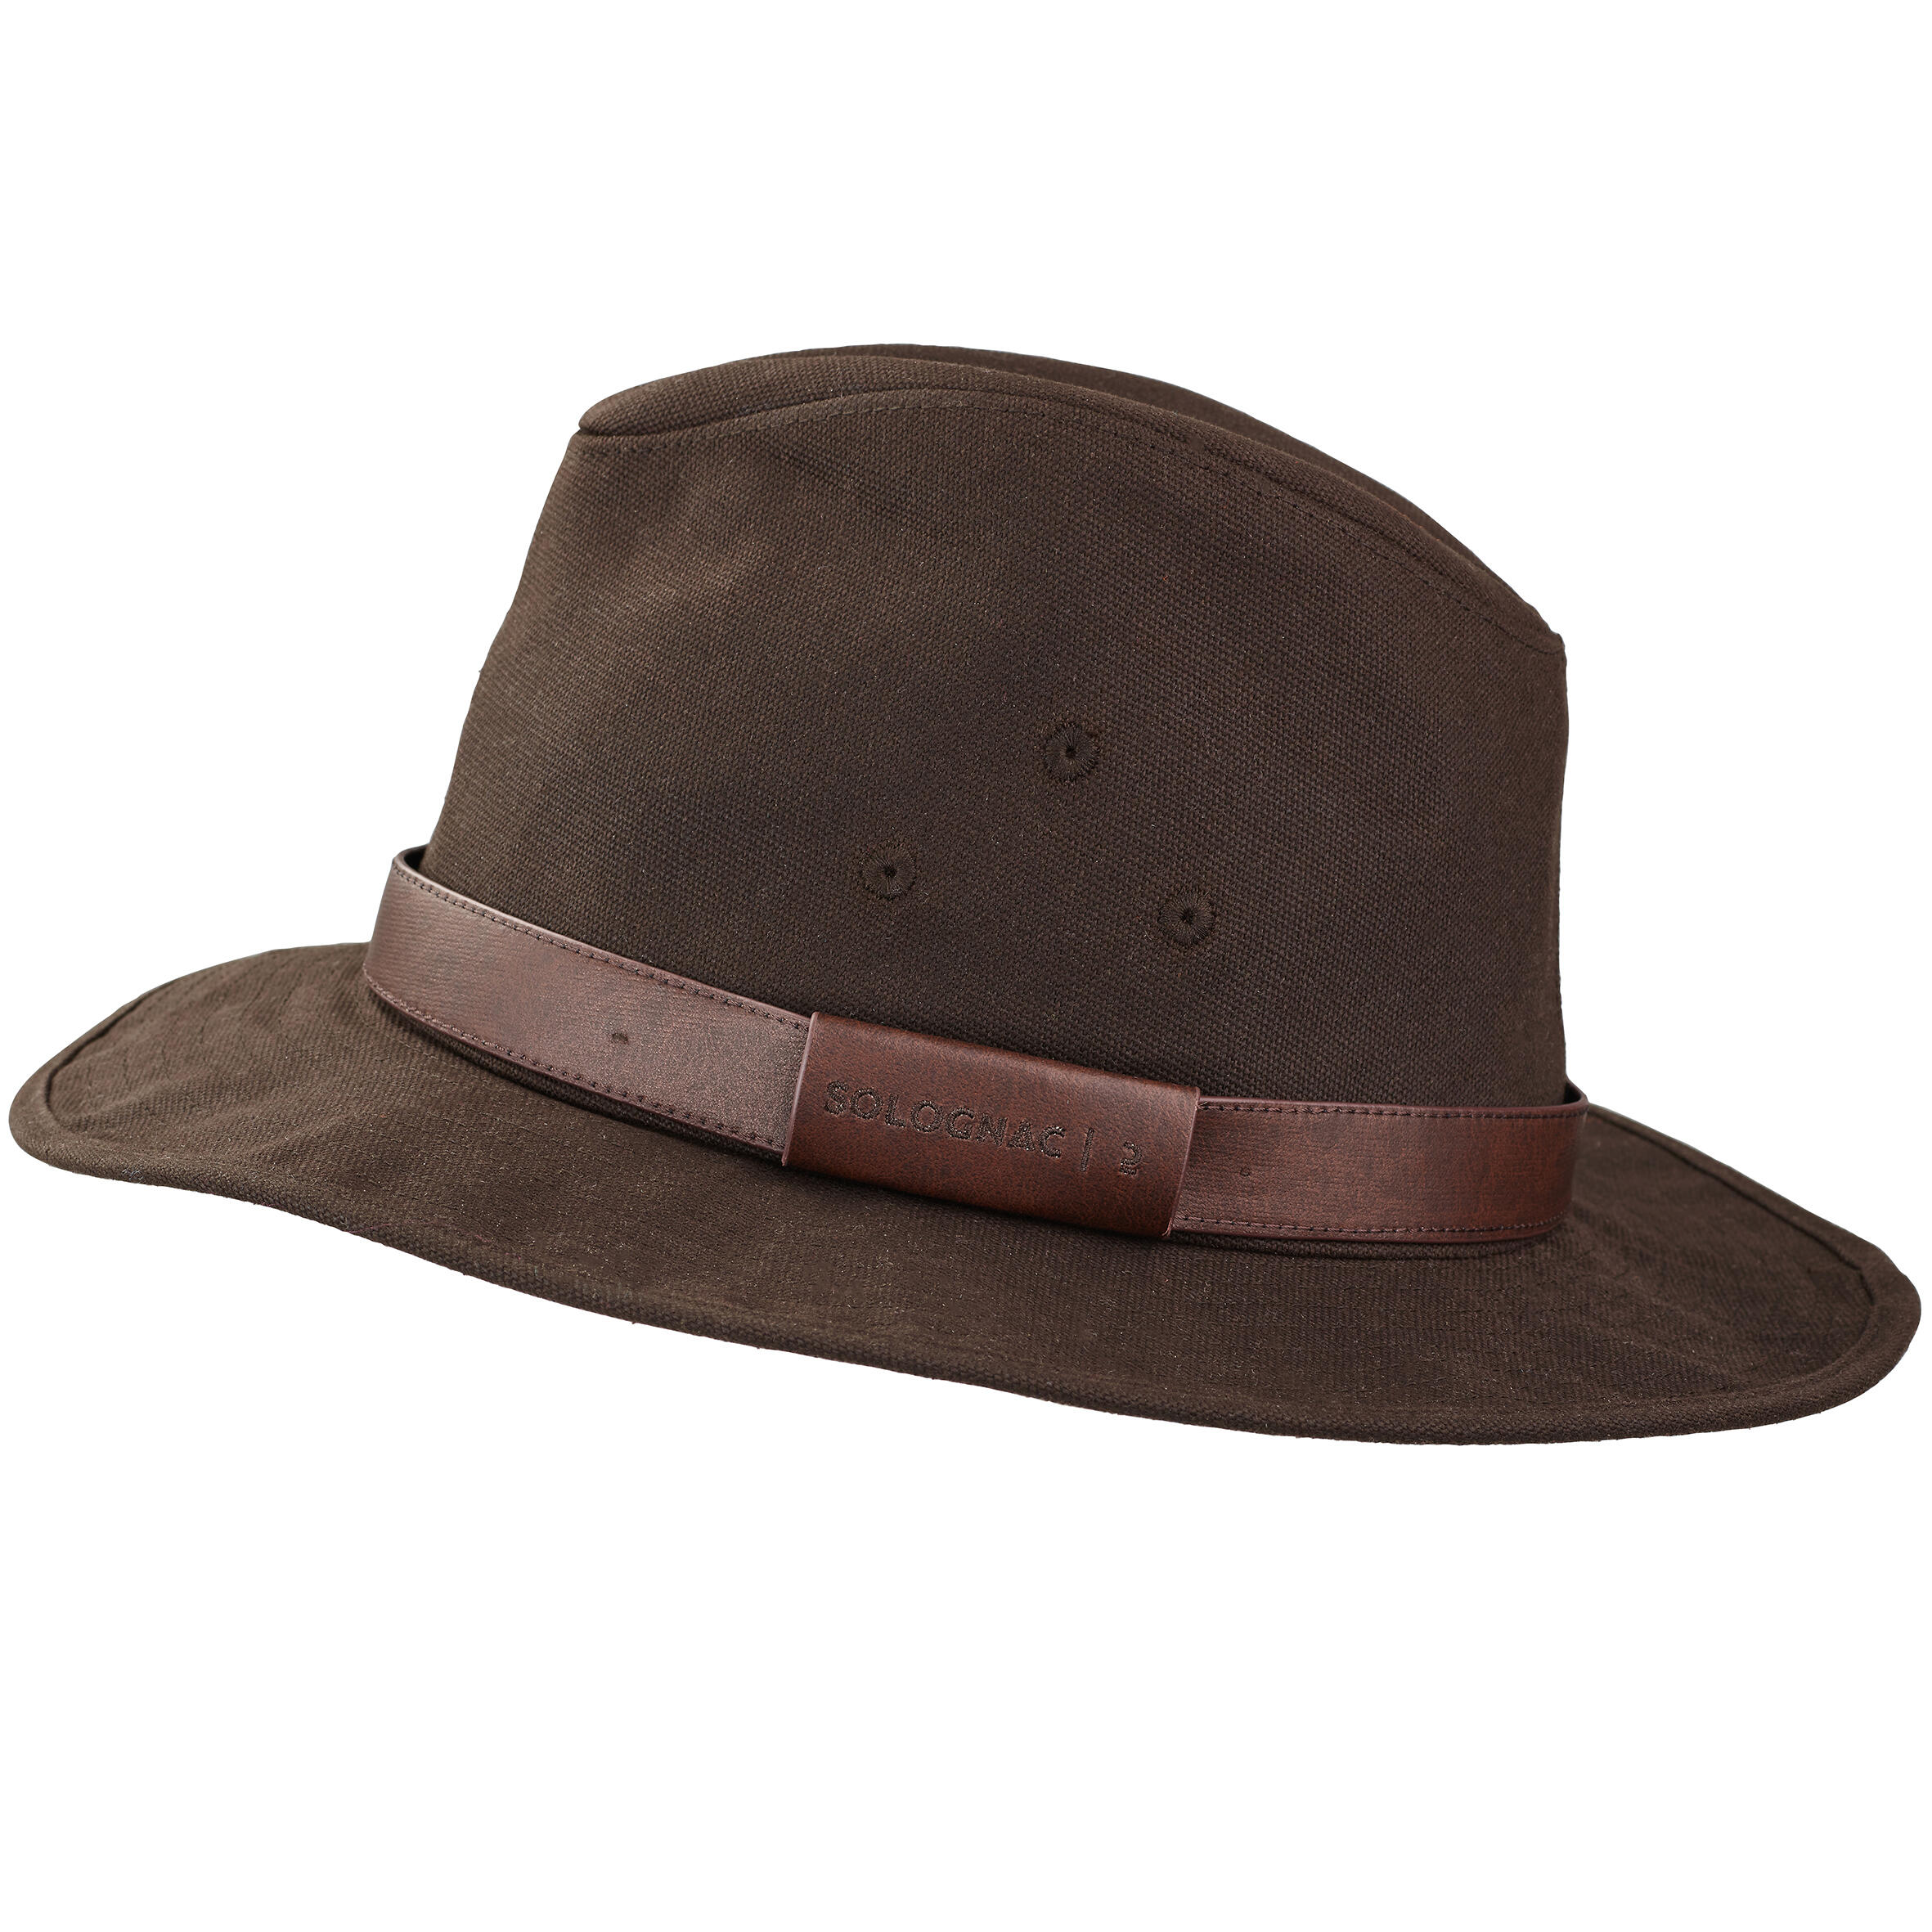 Hunting hat 540, durable and water-repellent 5/7